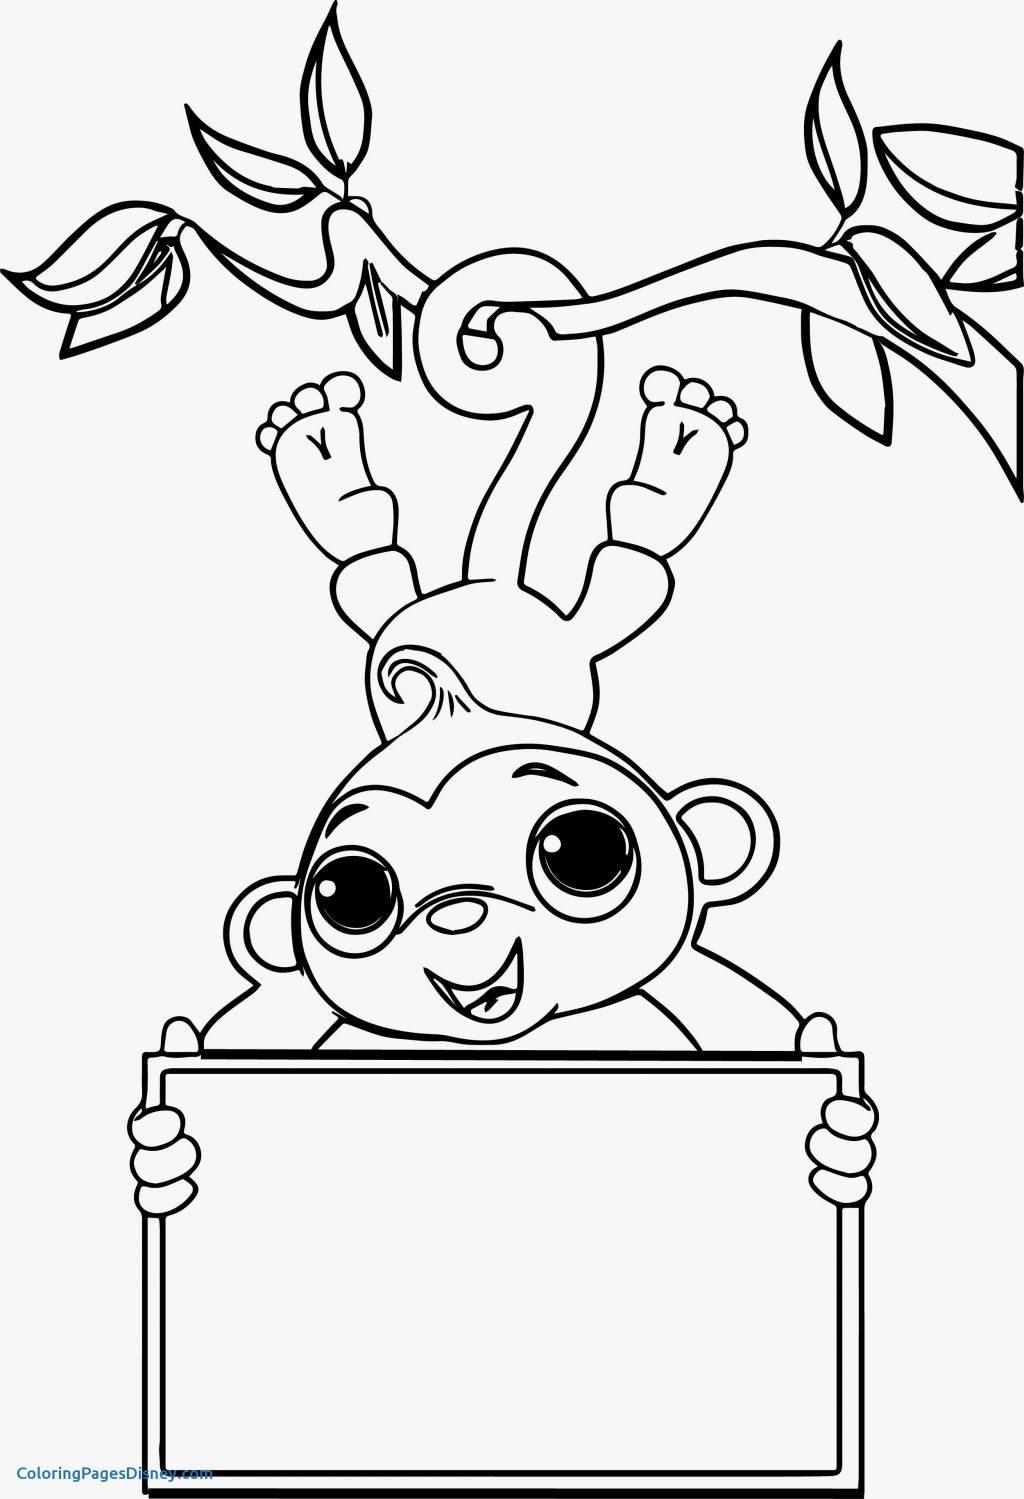 Coloring Pages Of Monkeys Coloring Page Sock Monkey Coloring Page Tingameday Com Best